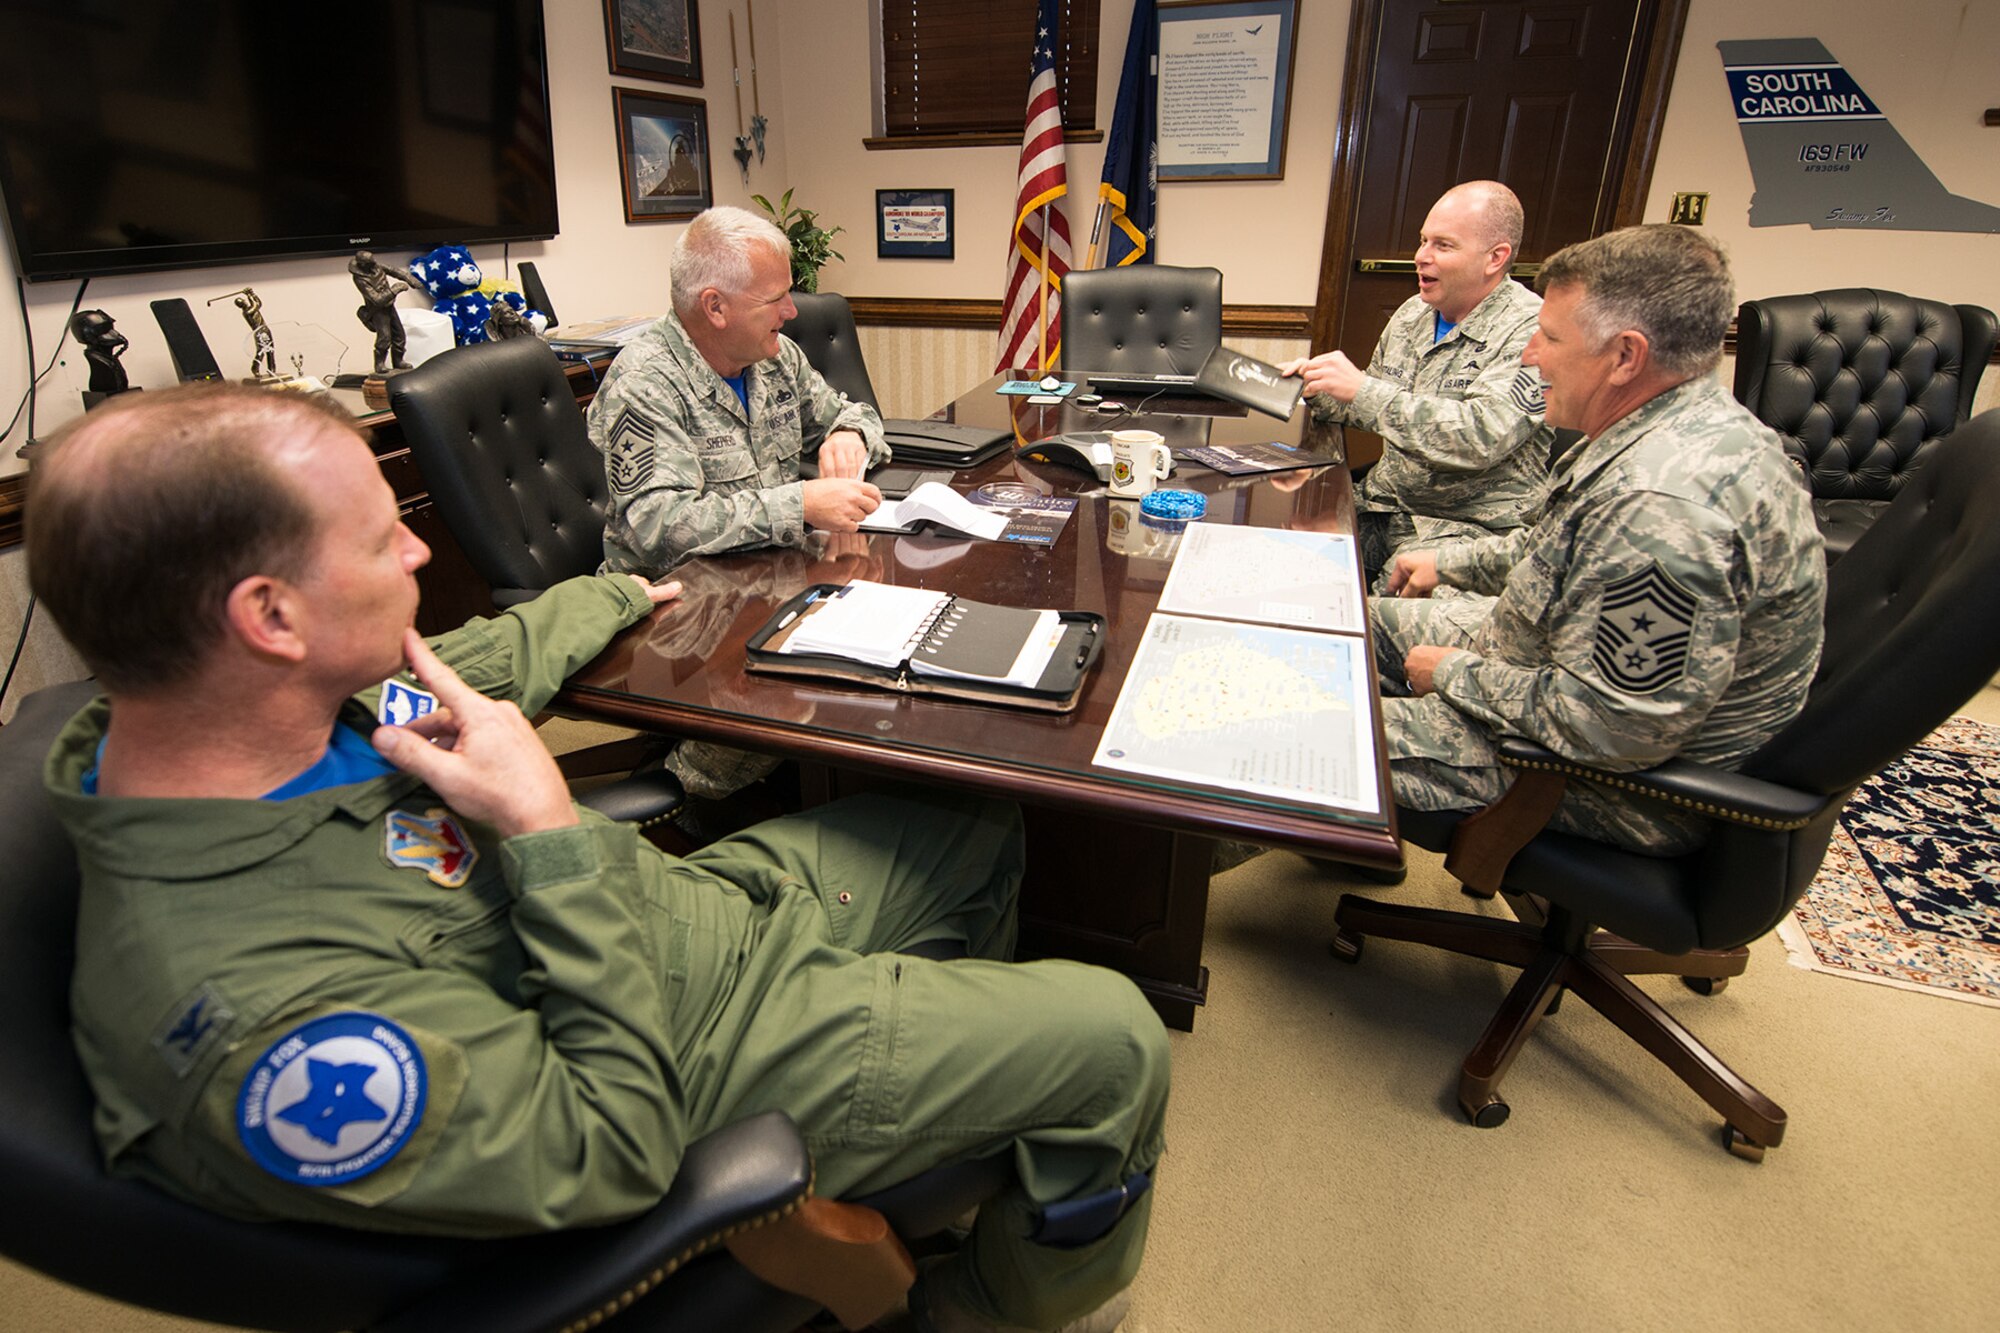 U.S. Air Force Chief Master Sgt. James W. Hotaling (back row), Command Chief Master Sgt. for the Air National Guard, meets with Col. David Meyer, 169th Fighter Wing commander, S.C. State Command Chief Master Sgt. Dean Widener (center-right) and 169th Fighter Wing Command Chief Stephen Shepherd (center-left), during a visit to the South Carolina Air National Guard at McEntire Joint National Guard Base, S.C., April 11, 2015. Hotaling hosted town hall meetings to engage Swamp Fox Airmen in the discussion of three key points; the profession of arms, the health of the force and recognizing and renewing commitments to Airmen.  (U.S. Air National Guard photo by Tech. Sgt. Jorge Intriago/RELEASED)